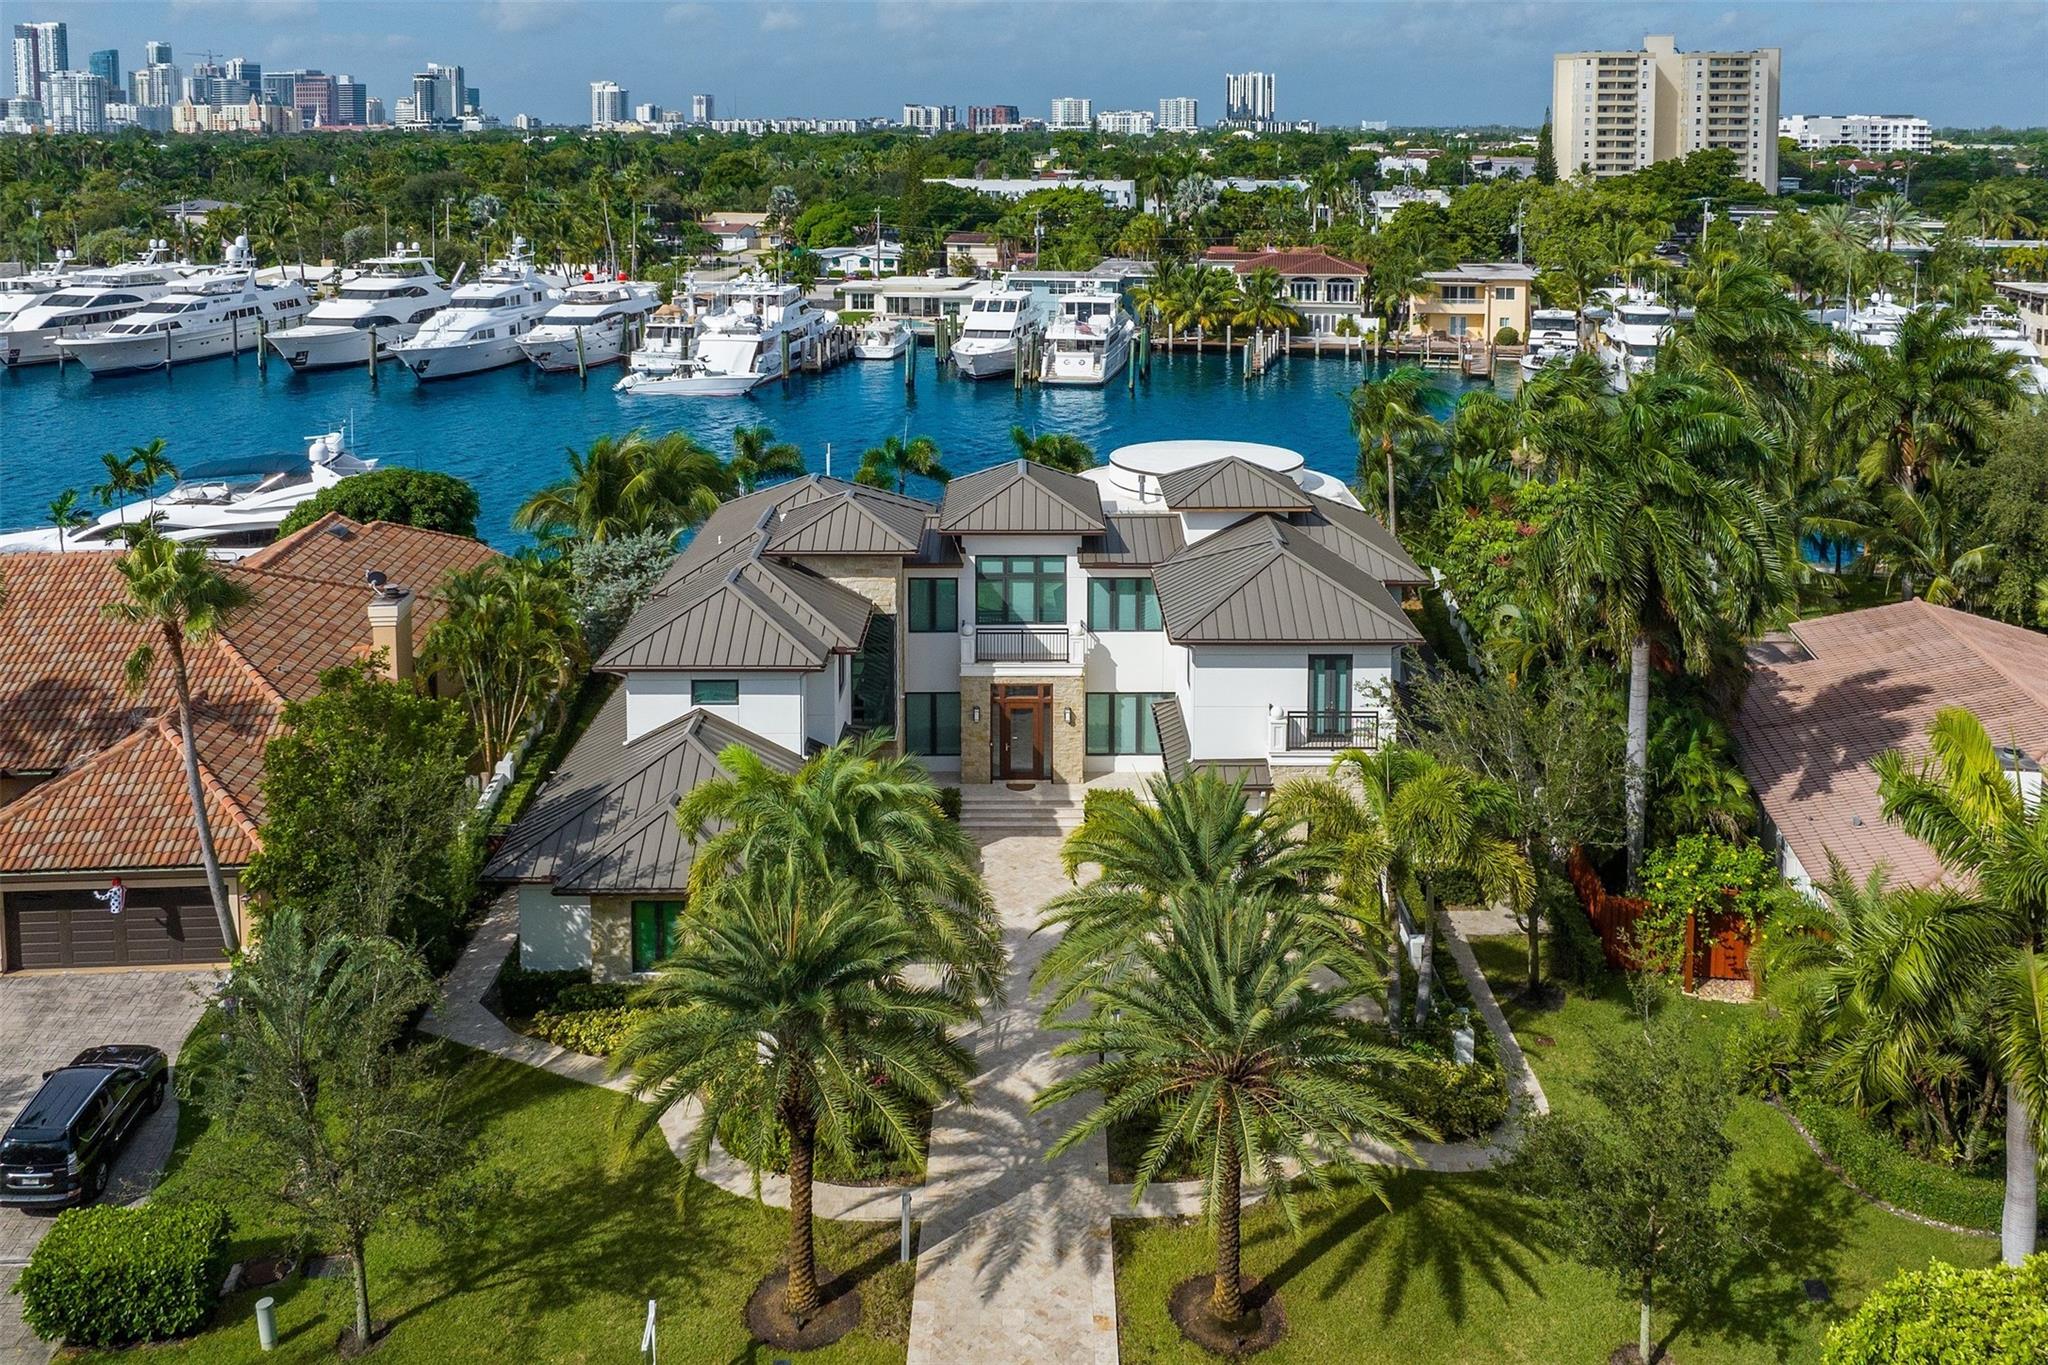 Nestled in the prestigious Sunrise Intracoastal enclave, this stunning estate emerges as a paragon of luxury waterfront living.  This 5-bed, 5.5-bath masterpiece spans 6,994 SF, offering unmatched elegance. A generous 123' of prime WF, a sleek contemporary design, private elevator & an inviting open entertaining area, seamlessly connecting to a chef's kitchen & dining room. A VIP suite & private home cinema complete the ground level. The grand primary suite offers an intimate retreat, complete with lavish dual bathrooms, walk-in closets and oversized terrace. Outside, the serene waterfront vista is complemented by a sophisticated entertainment area, where luxury meets nature's beauty. Experience the pinnacle of South Florida luxury living! Beach, shopping and dining just minutes away!